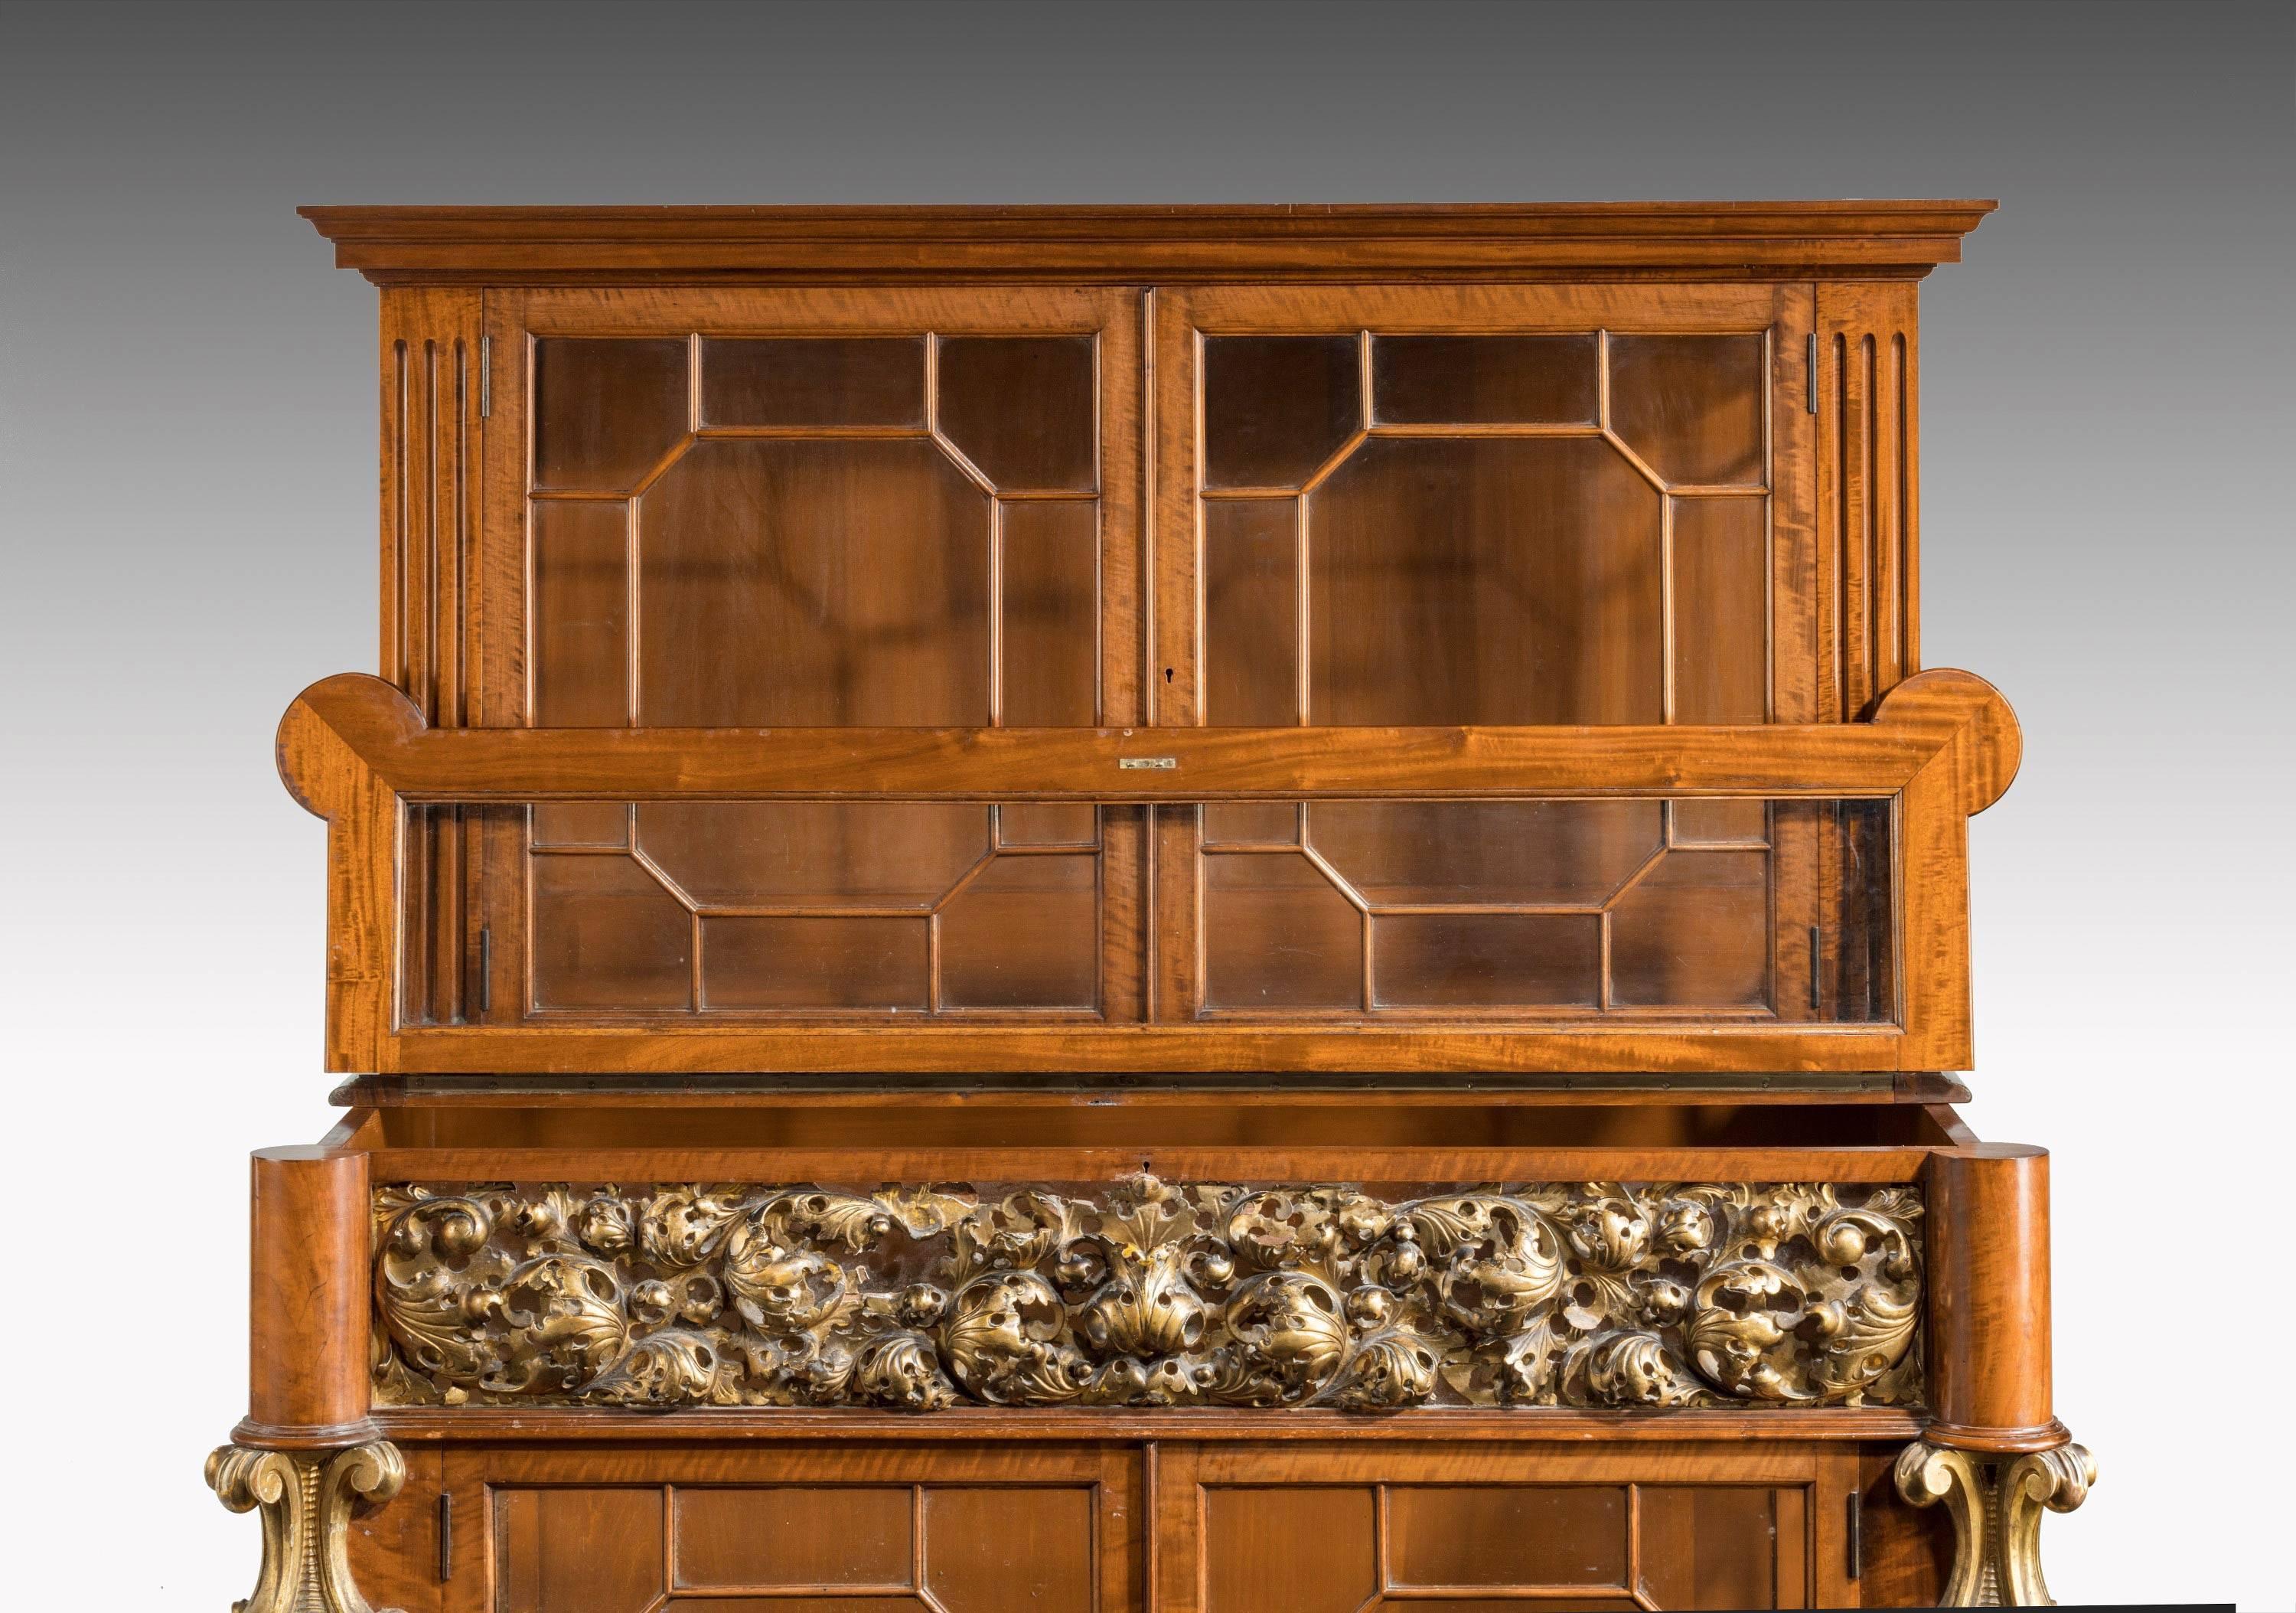 A most unusual mid-19th century satinwood cabinet. With finely carved and elaborate giltwood decoration. The two sections glazed including the ends.